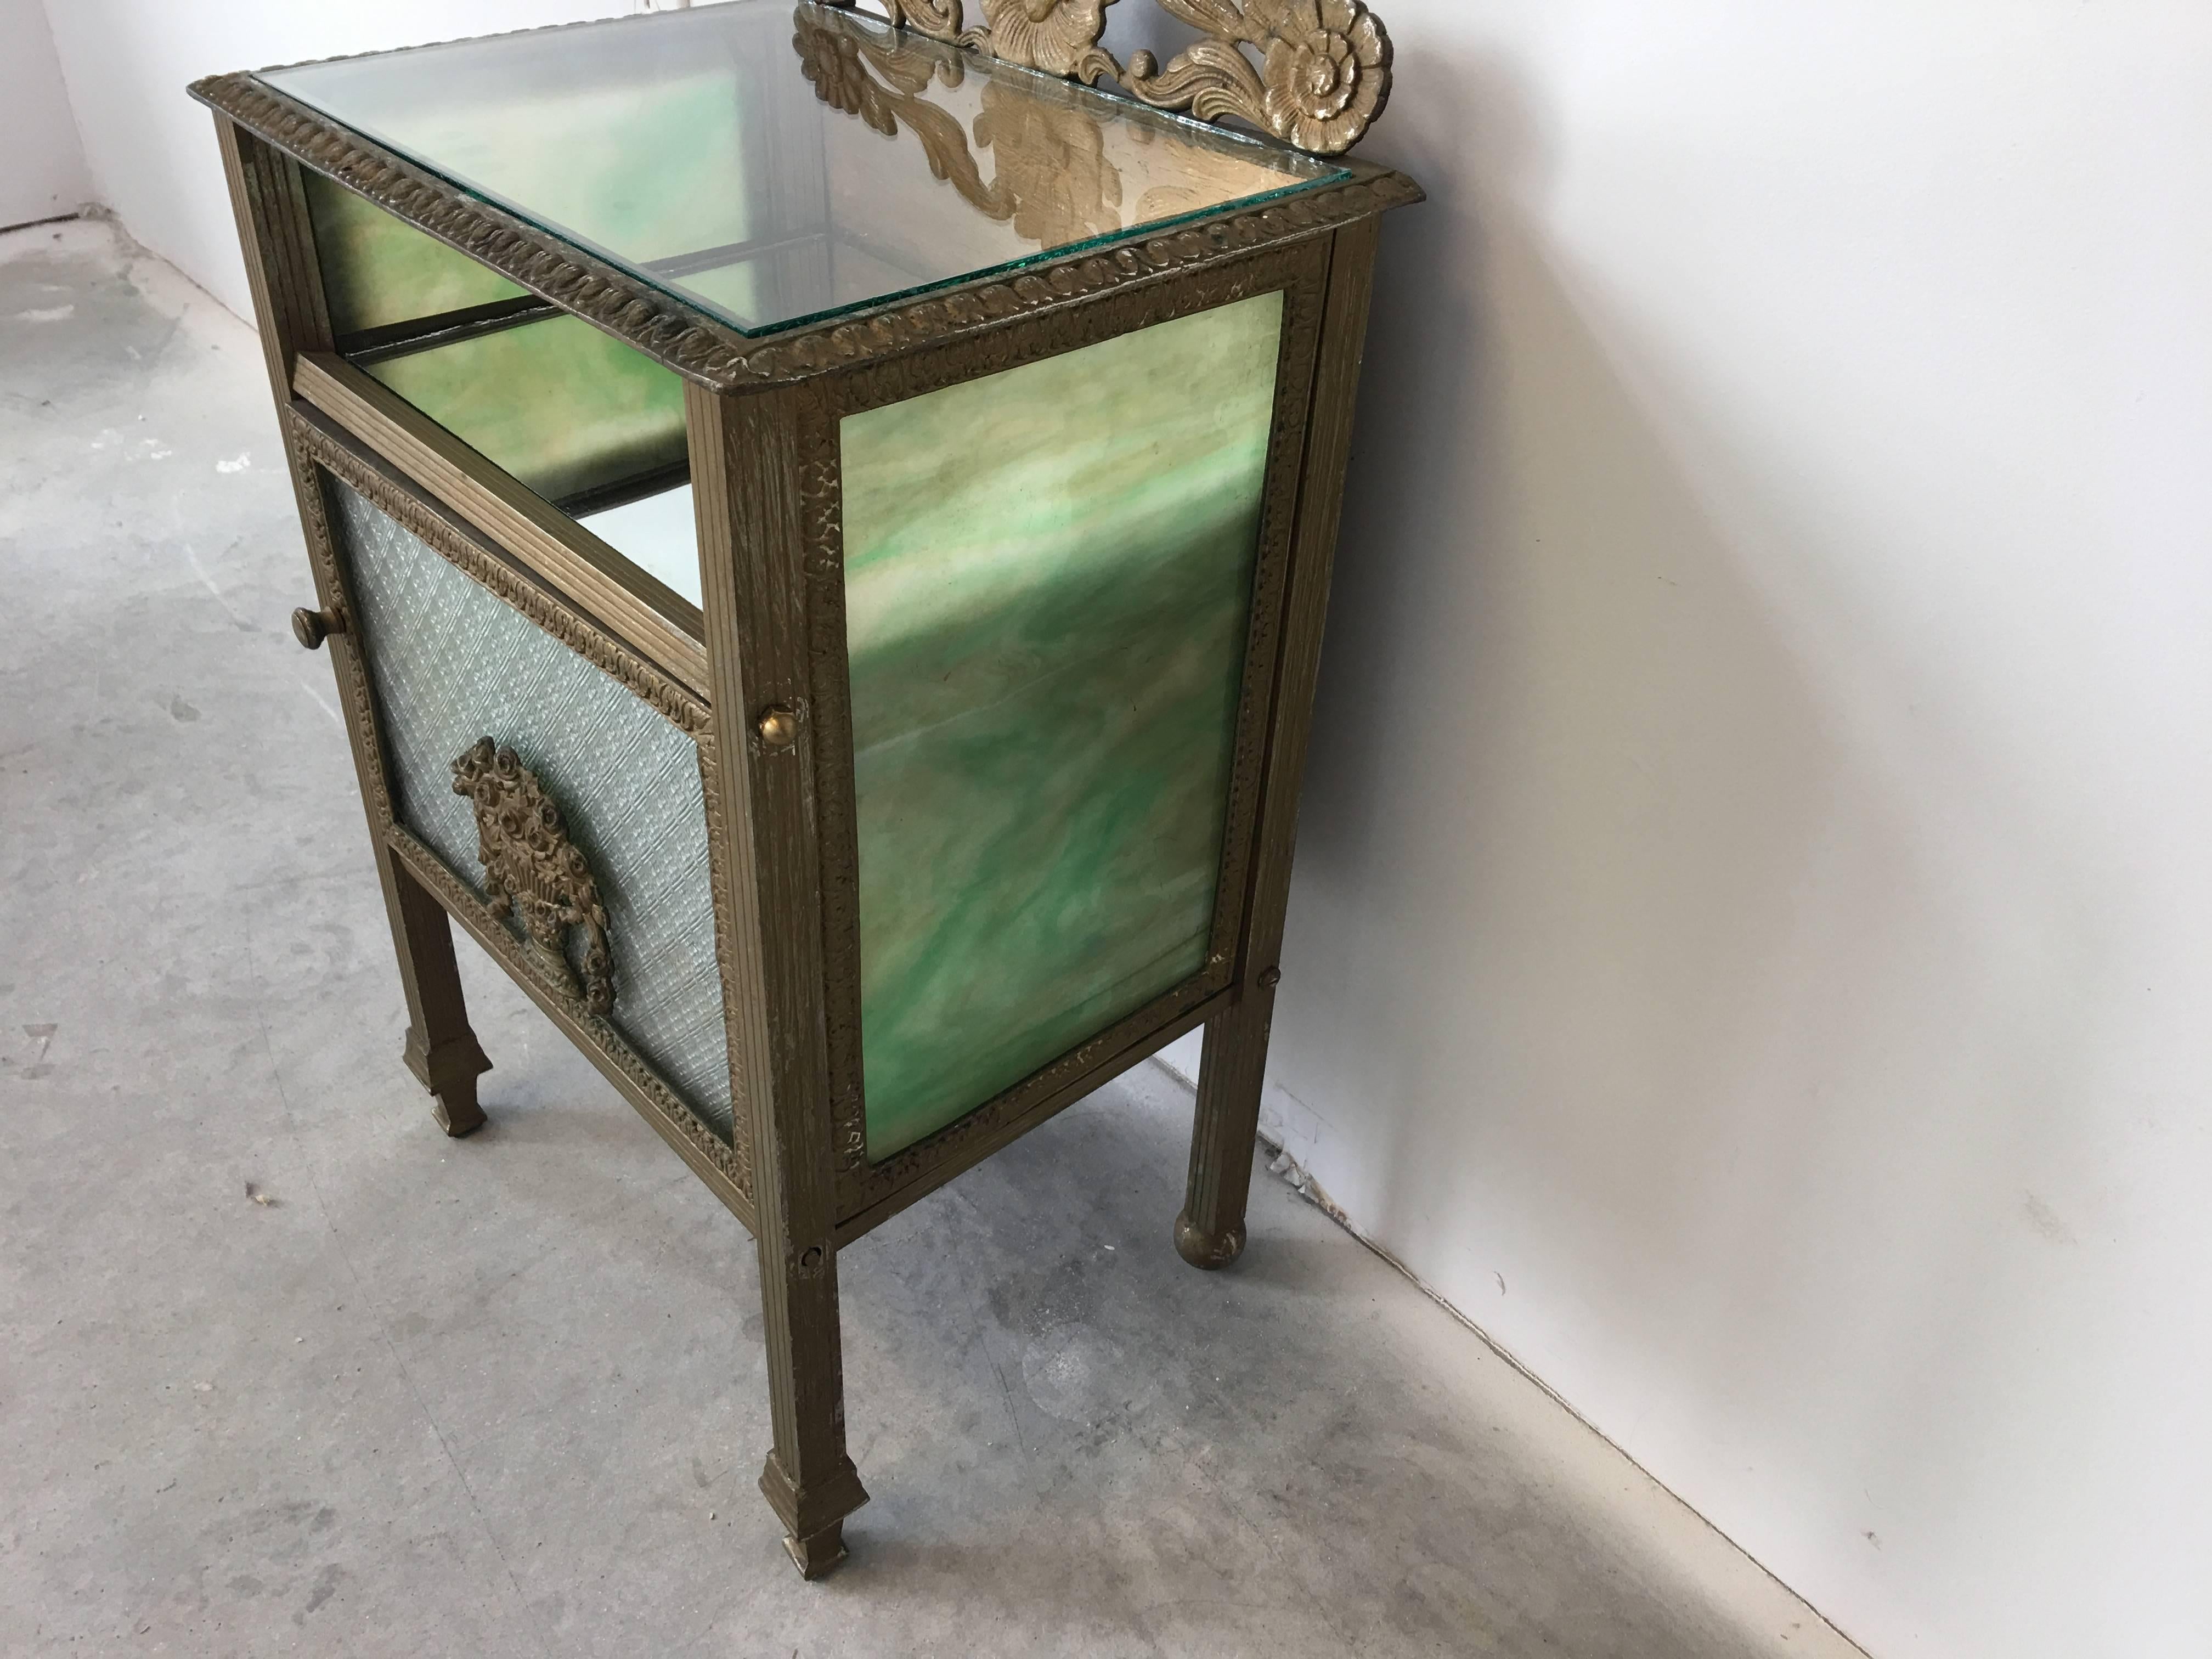 Offered is a gorgeous, 19th century Art Nouveau slag glass, bronze, and metal side table. This petite piece is absolutely stunning, with a mirrored shelf, glass door, and giltwood backing. The slag glass is in pristine condition.